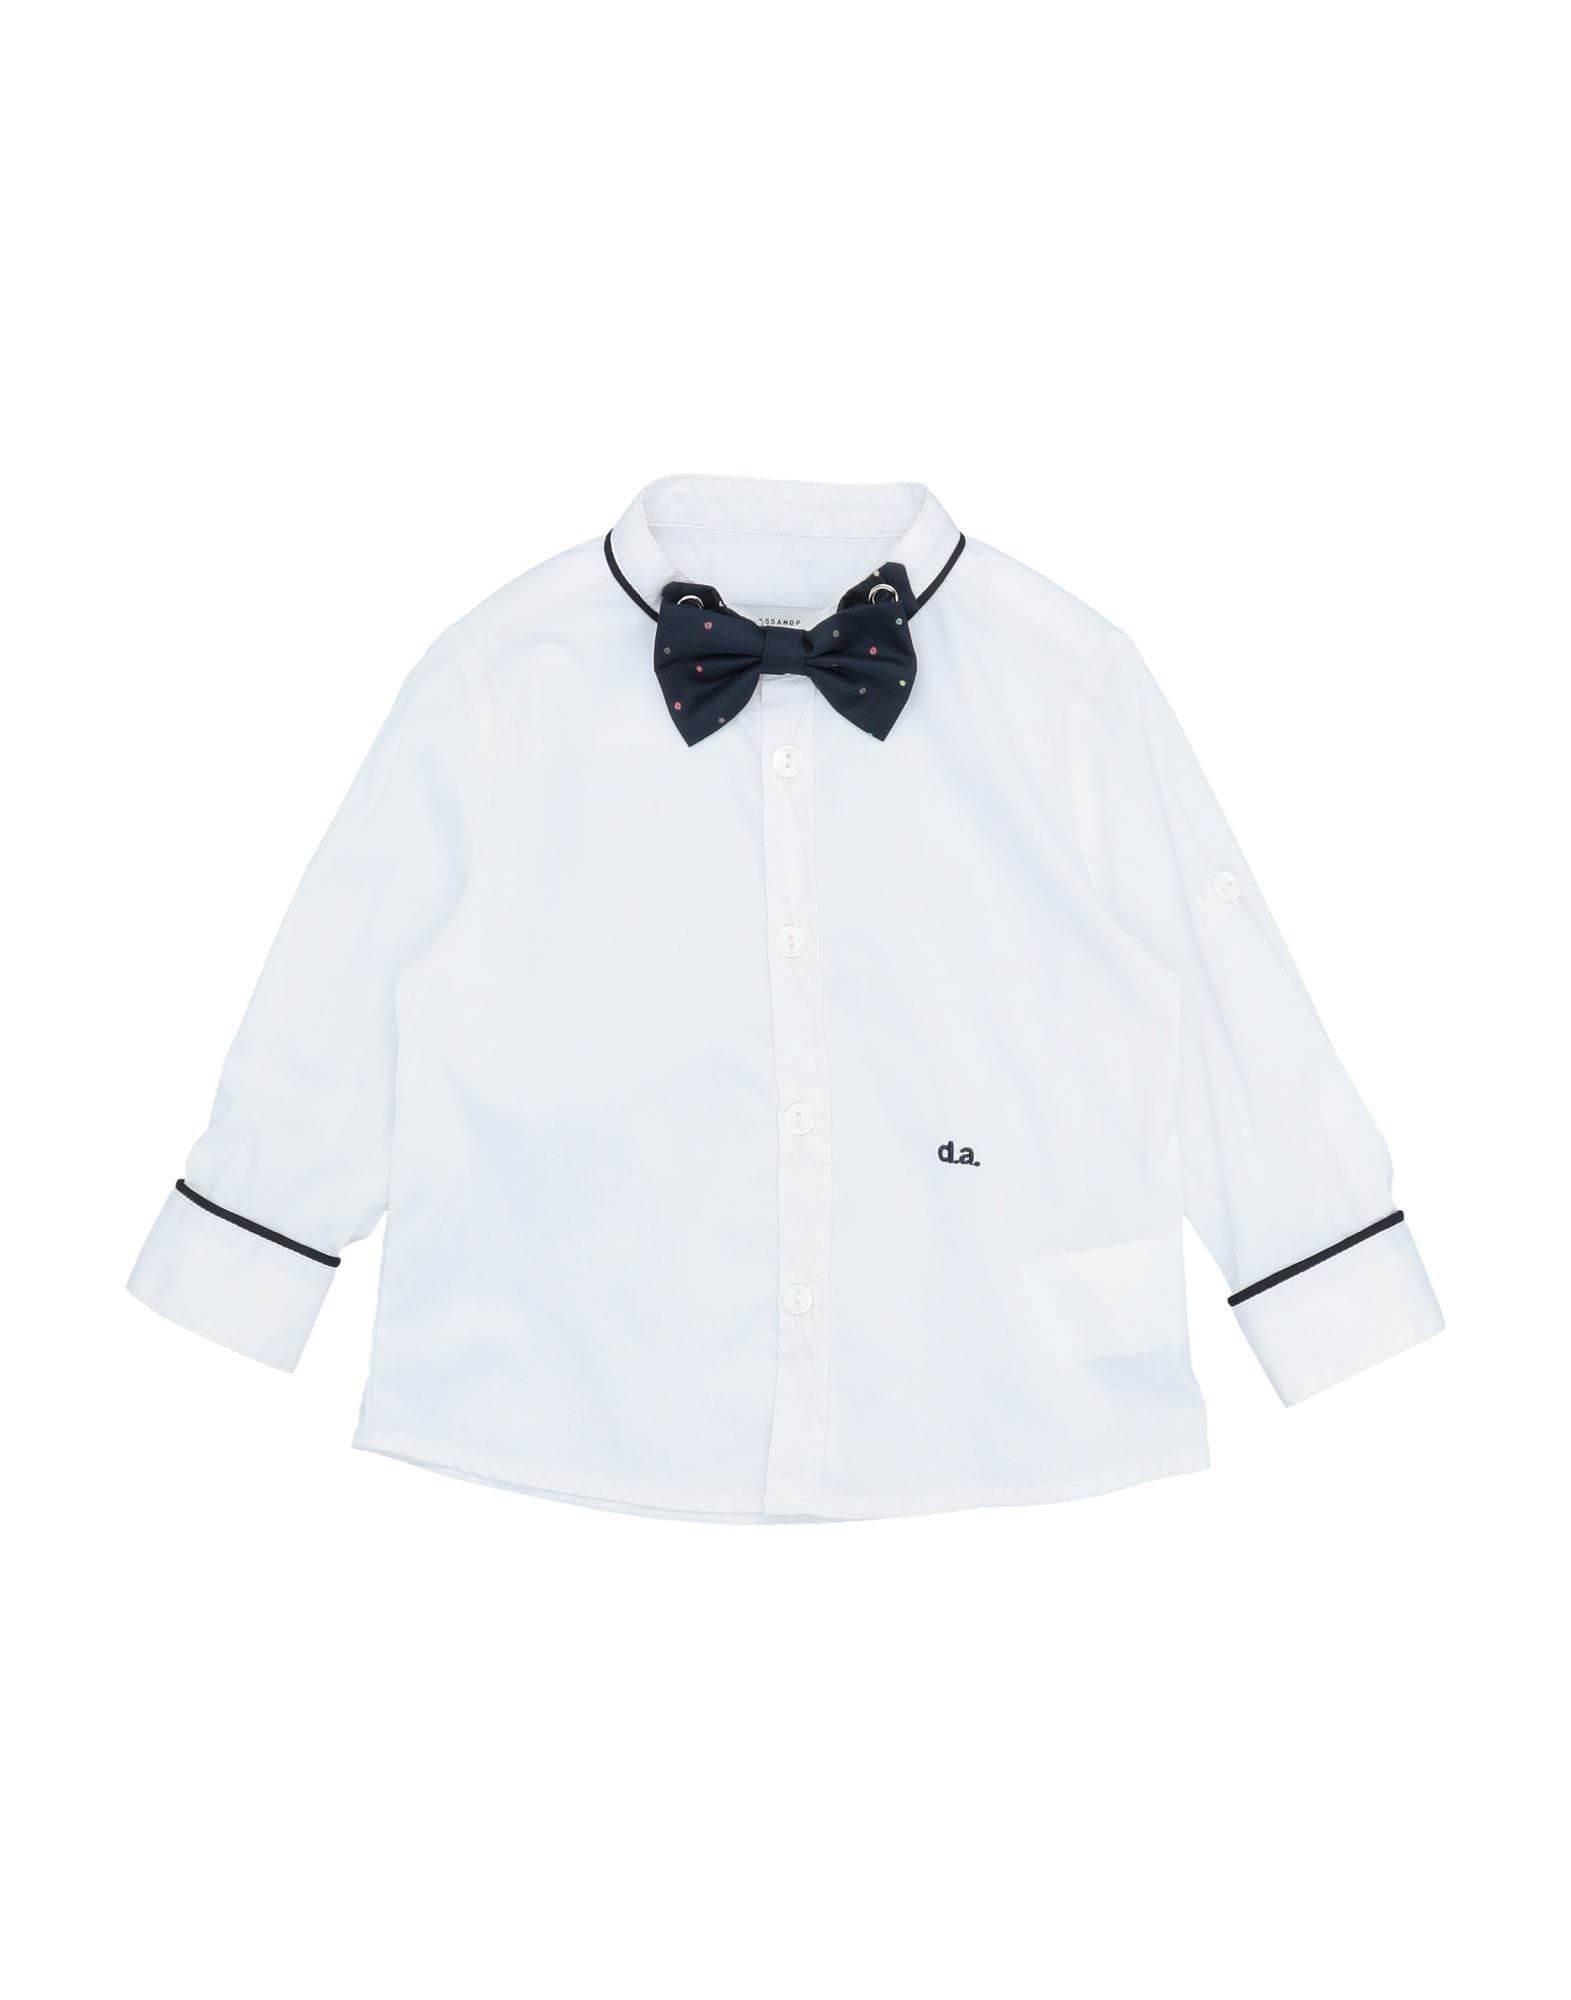 poplin, logo, detachable application, solid colour, front closure, button closing, long sleeves, buttoned cuffs, mandarin collar, no pockets, wash at 30° c, dry cleanable, iron at 110° c max, do not bleach, do not tumble dry, stretch, small sized